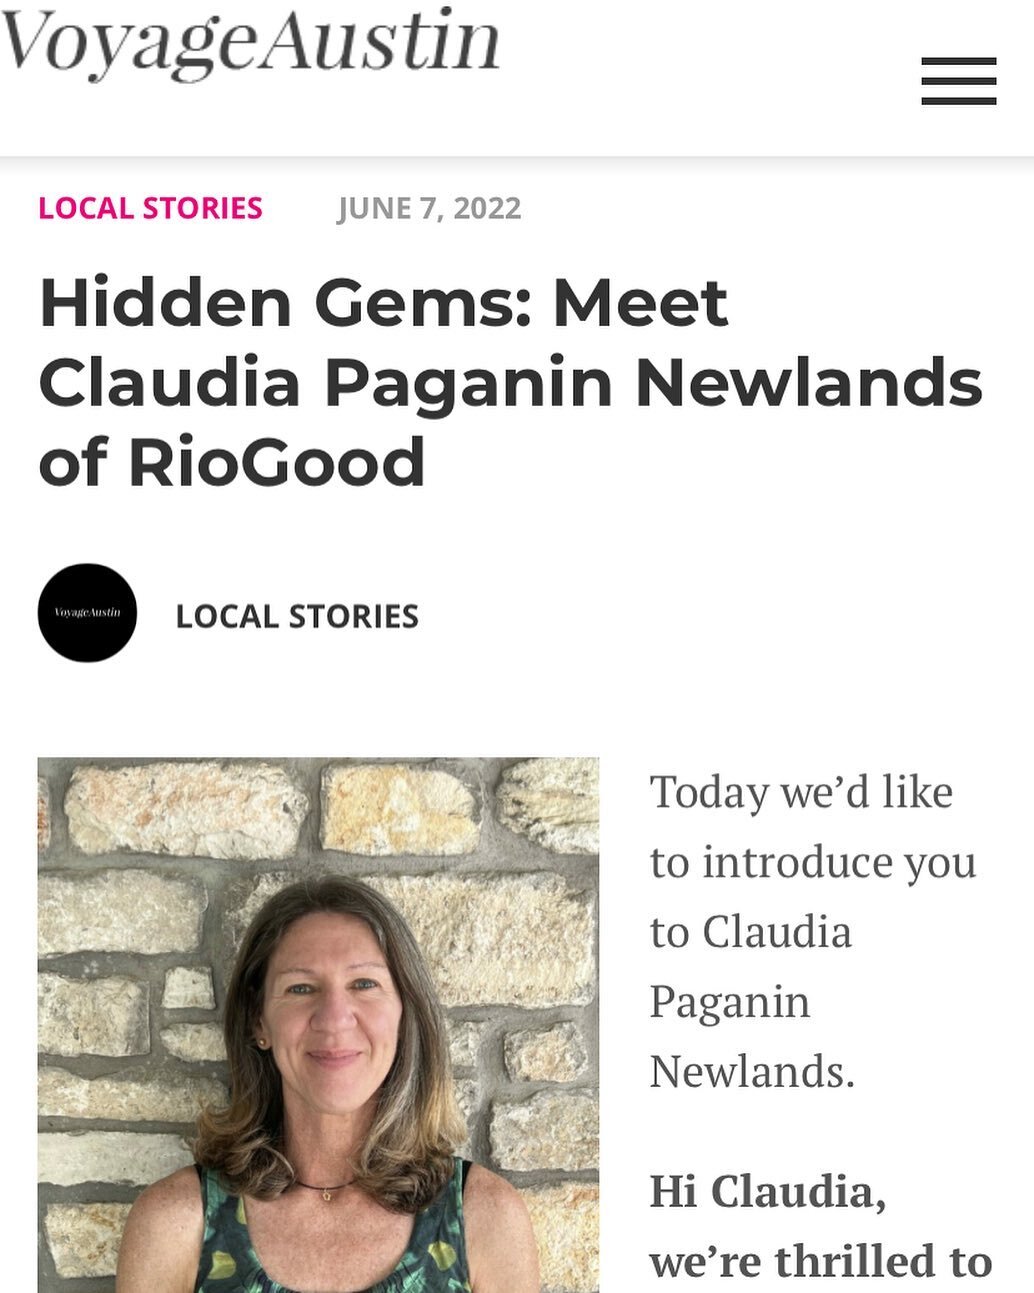 We just had an AMAZING interview with @voyageaustin where we talked about what Riogood is really all about! 😎
Check out the article HERE: http://voyageaustin.com/interview/hidden-gems-meet-claudia-paganin-newlands-of-riogood/

#plantbased #plantbase